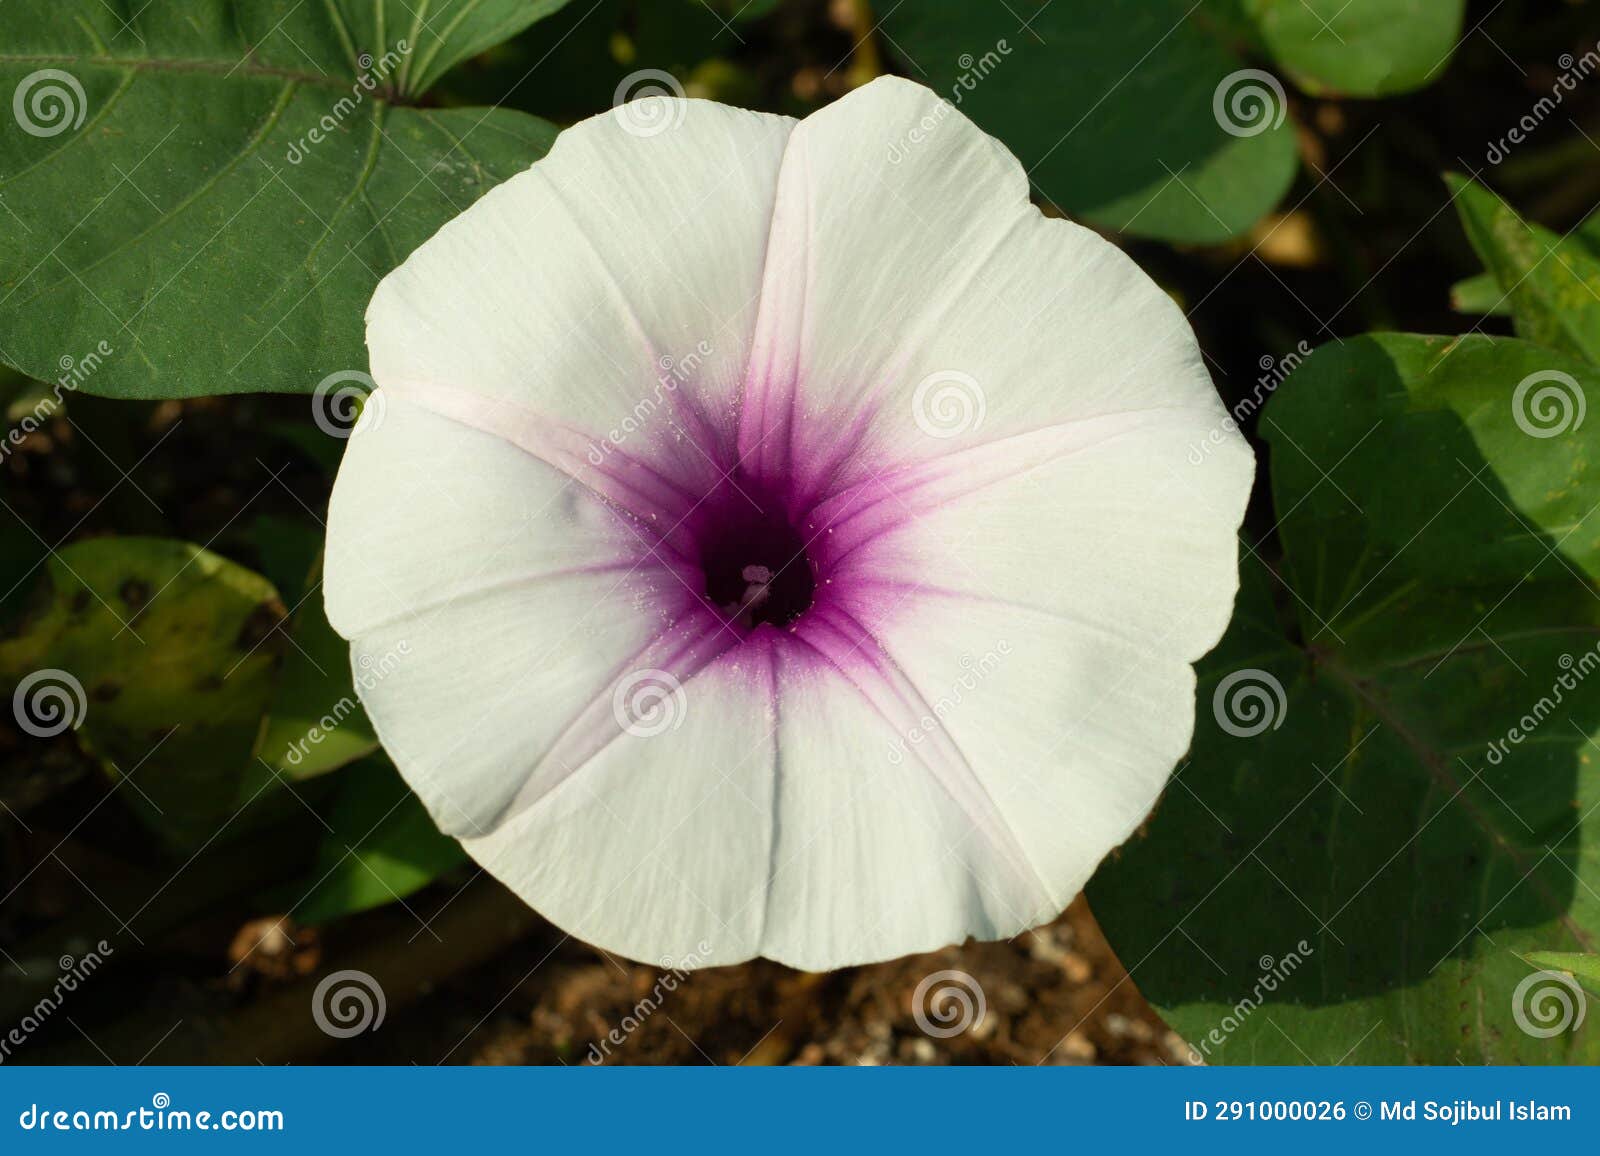 glade morning glory, bejuco de puerco, flower, white, pink, violet color